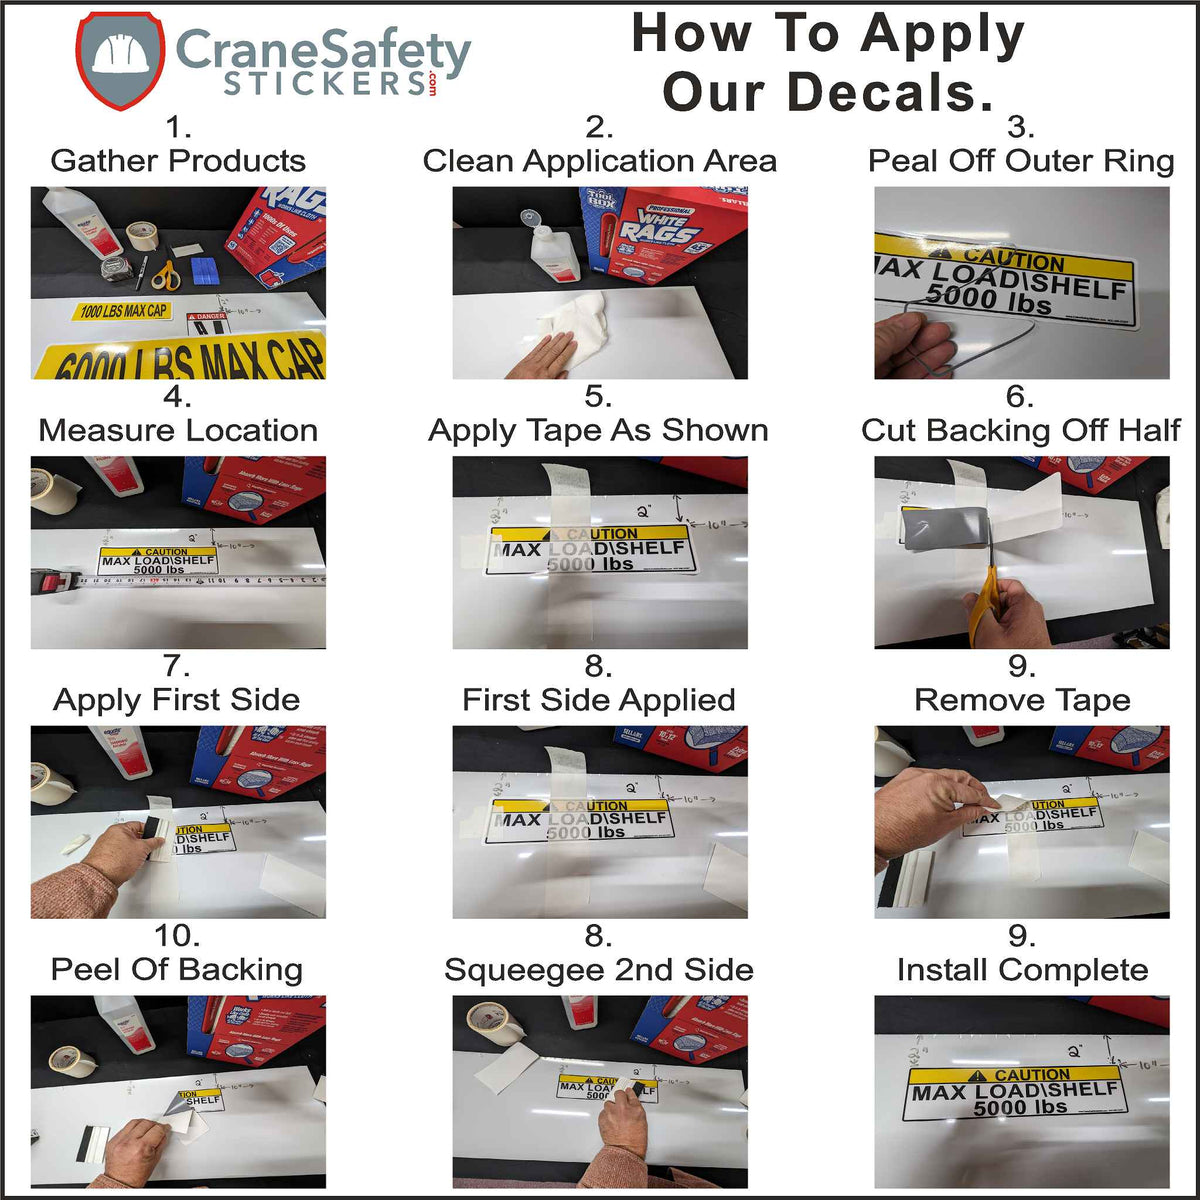 Directions on Applying Pinch Point Decals for Crane Safety.